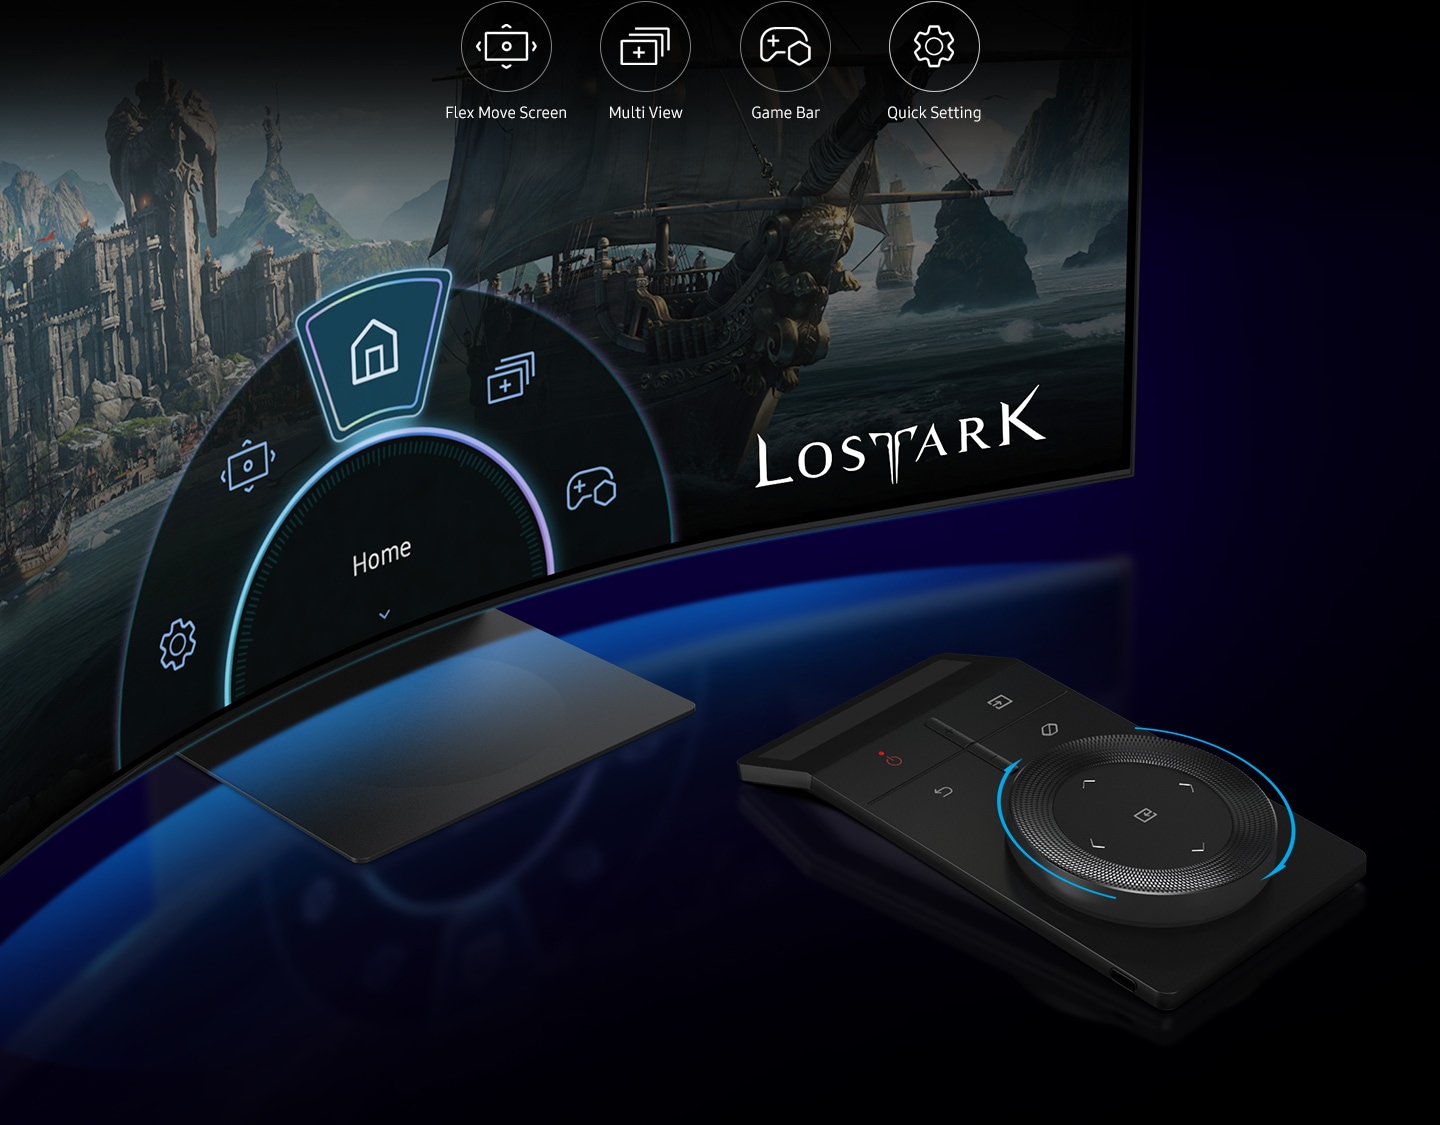 The monitor screen displays the Ark Dial toolbar, with the Ark Dial placed in front of the monitor turning focus of toolbar from home to Flex Move Screen, and to Multi view. Four logos - Flex Move Screen, Multi View, Game Bar, Quick Settings - are placed on the upper side of the screen.